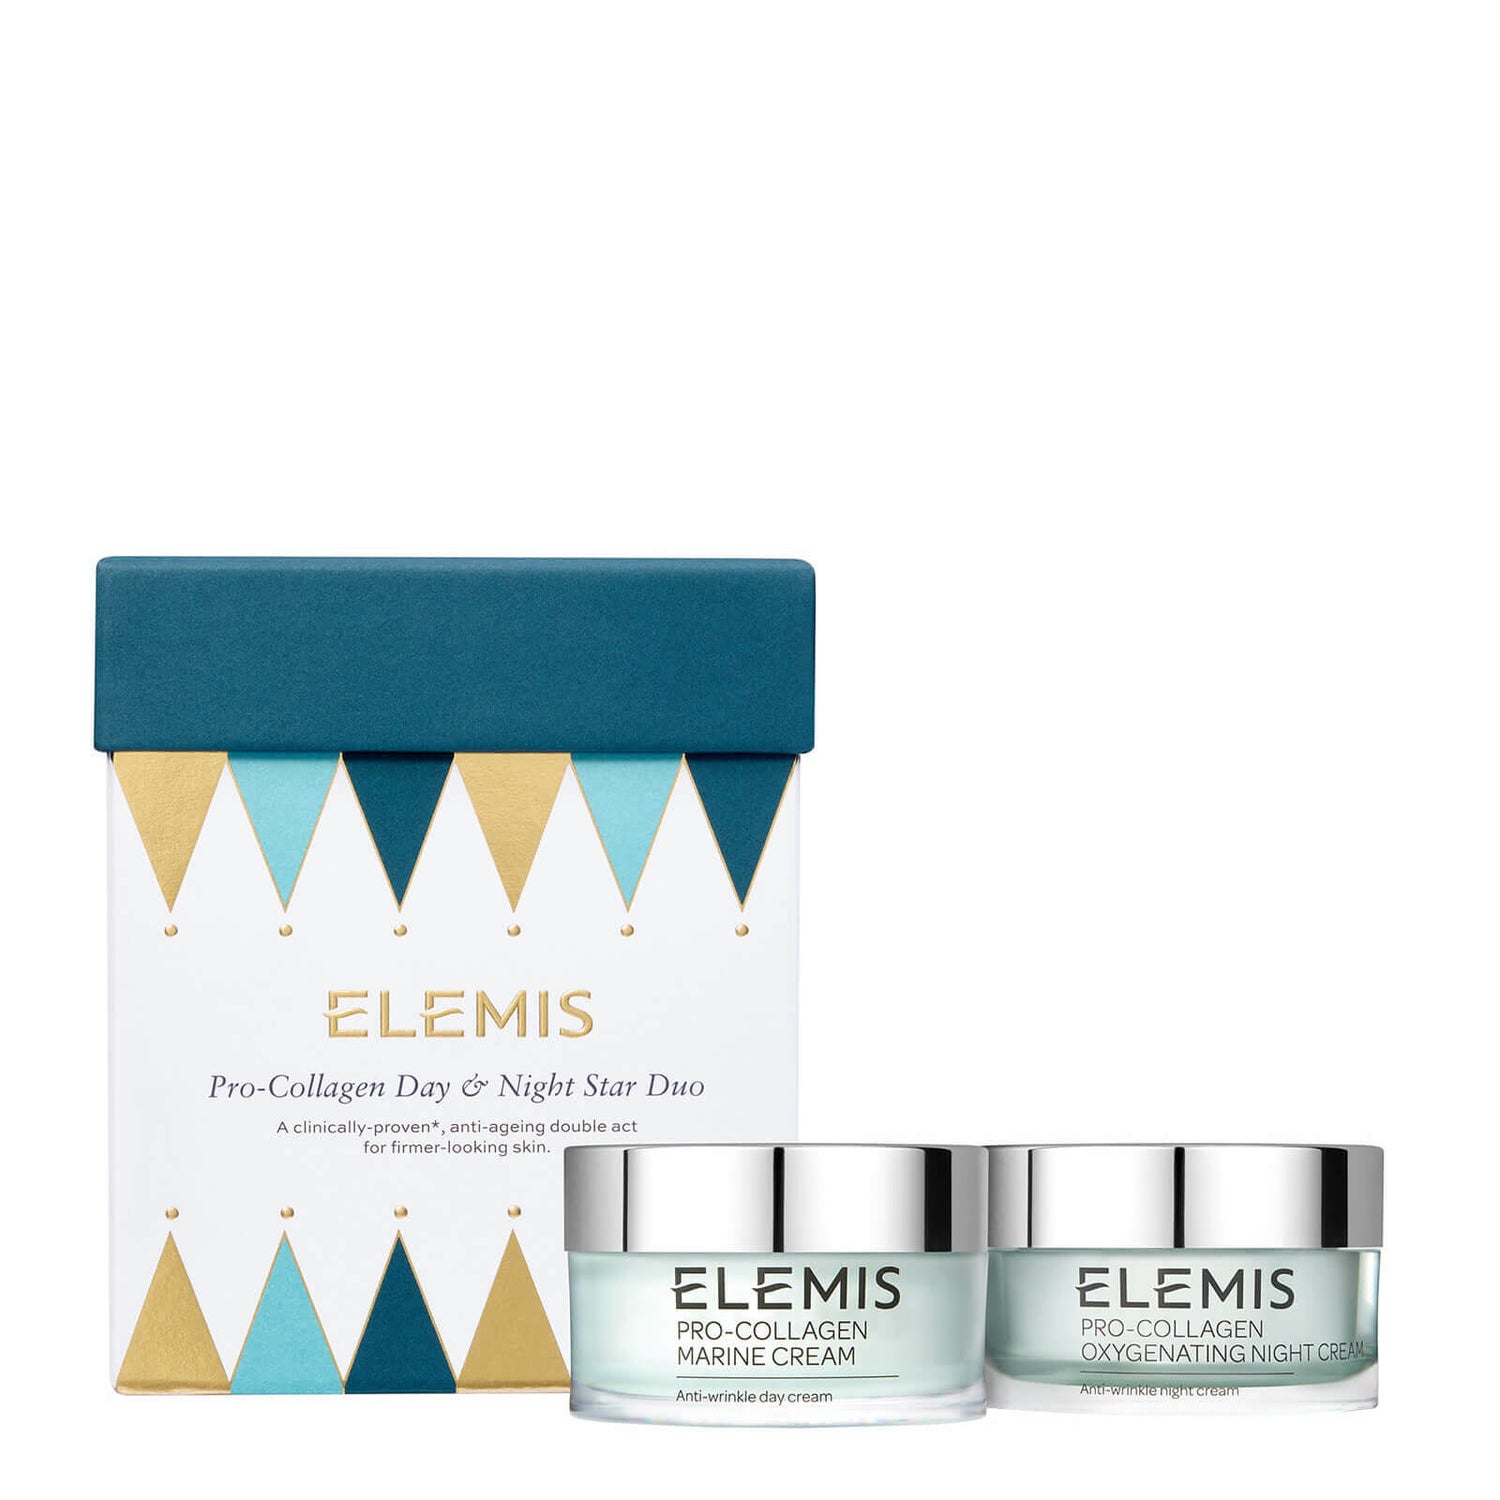 Elemis Pro-Collagen Day and Night Star Duo (Worth £186.00)